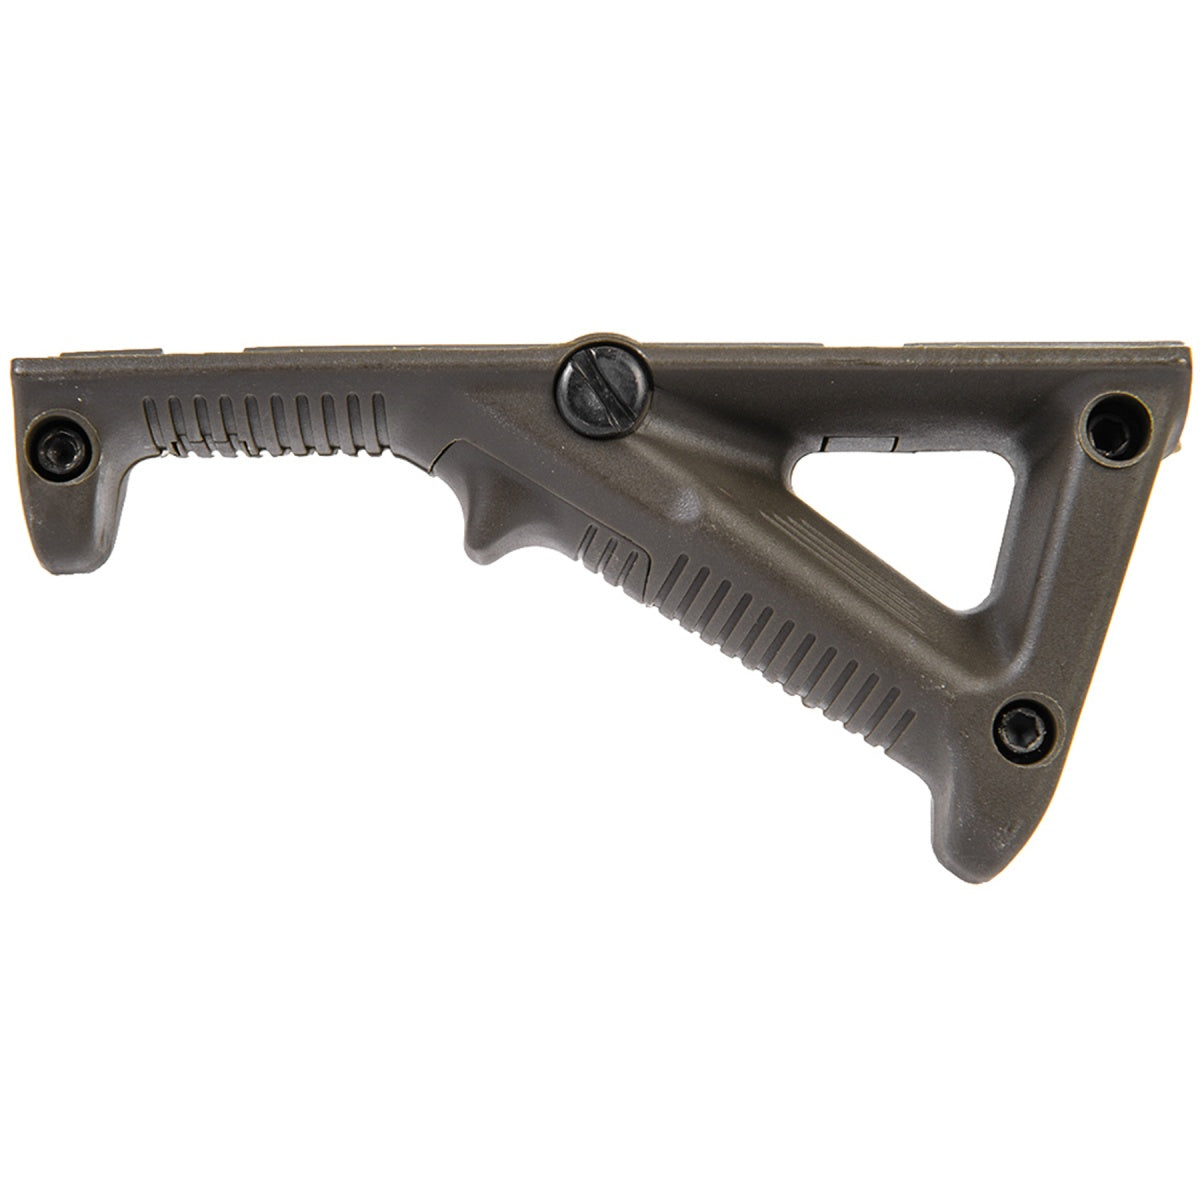 REINFORCED COMPACT POLYMER PICATINNY ANGLED FOREGRIP (OD Green) - ssairsoft